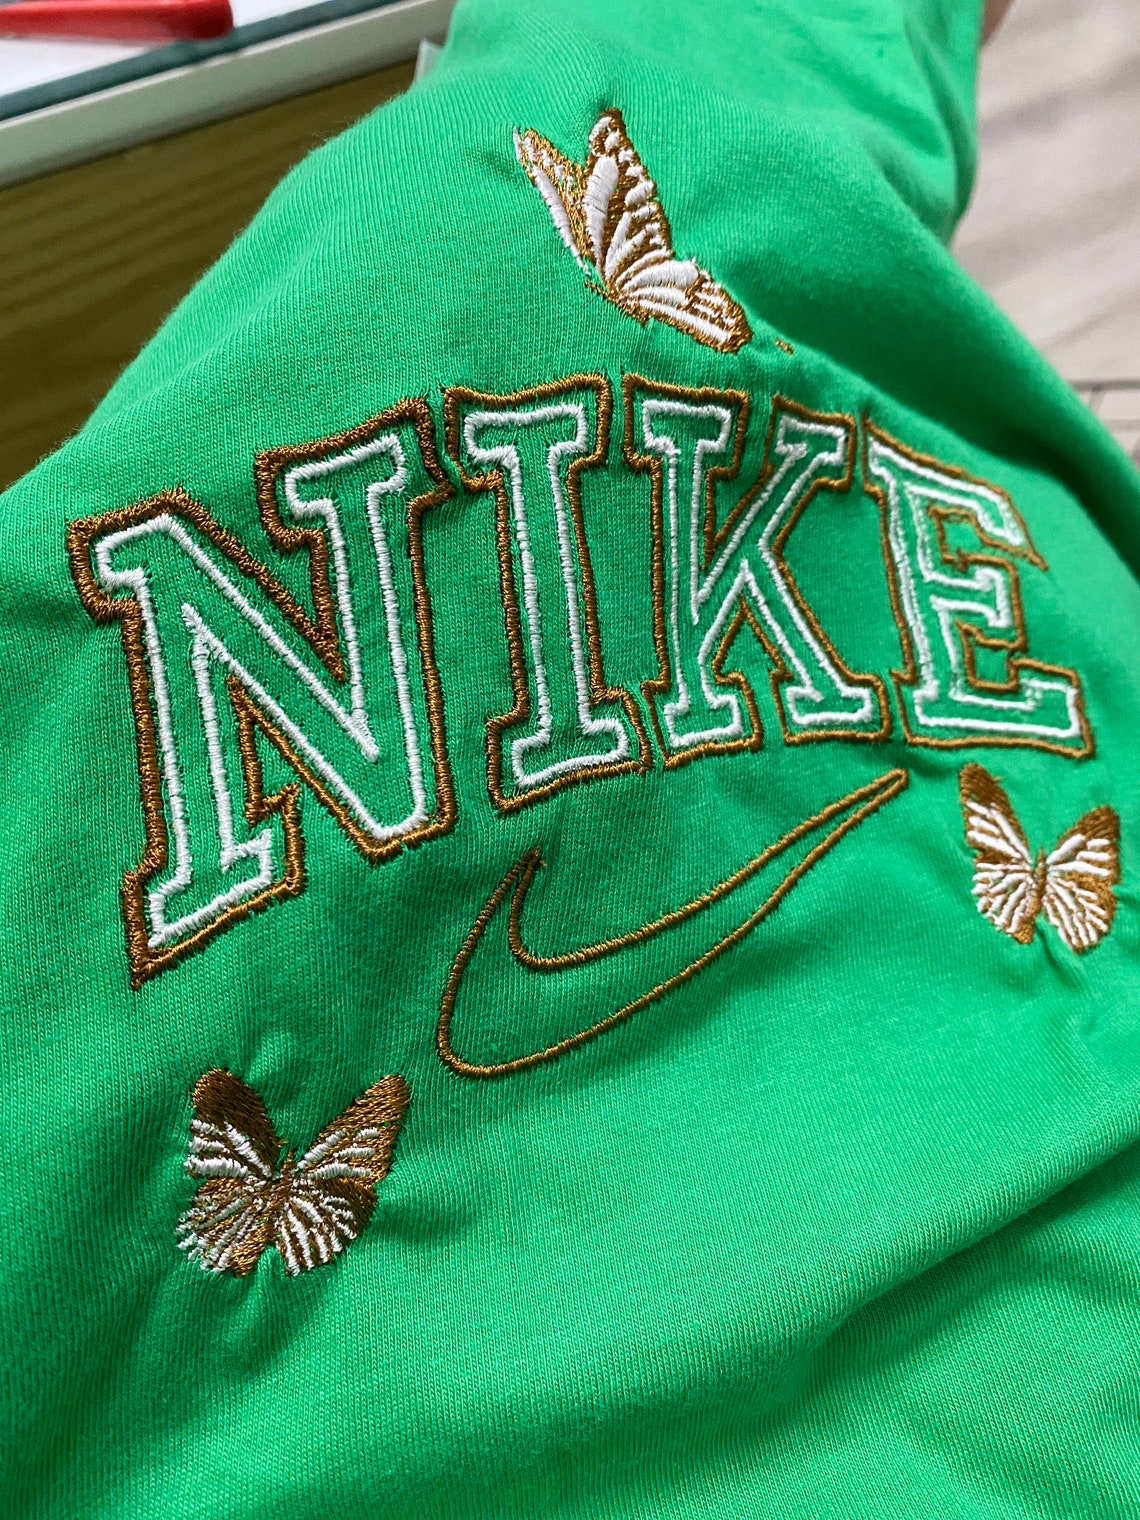 Embroidered Nike Nike Butterfly T-Shirt vintage Nike custom | Etsy